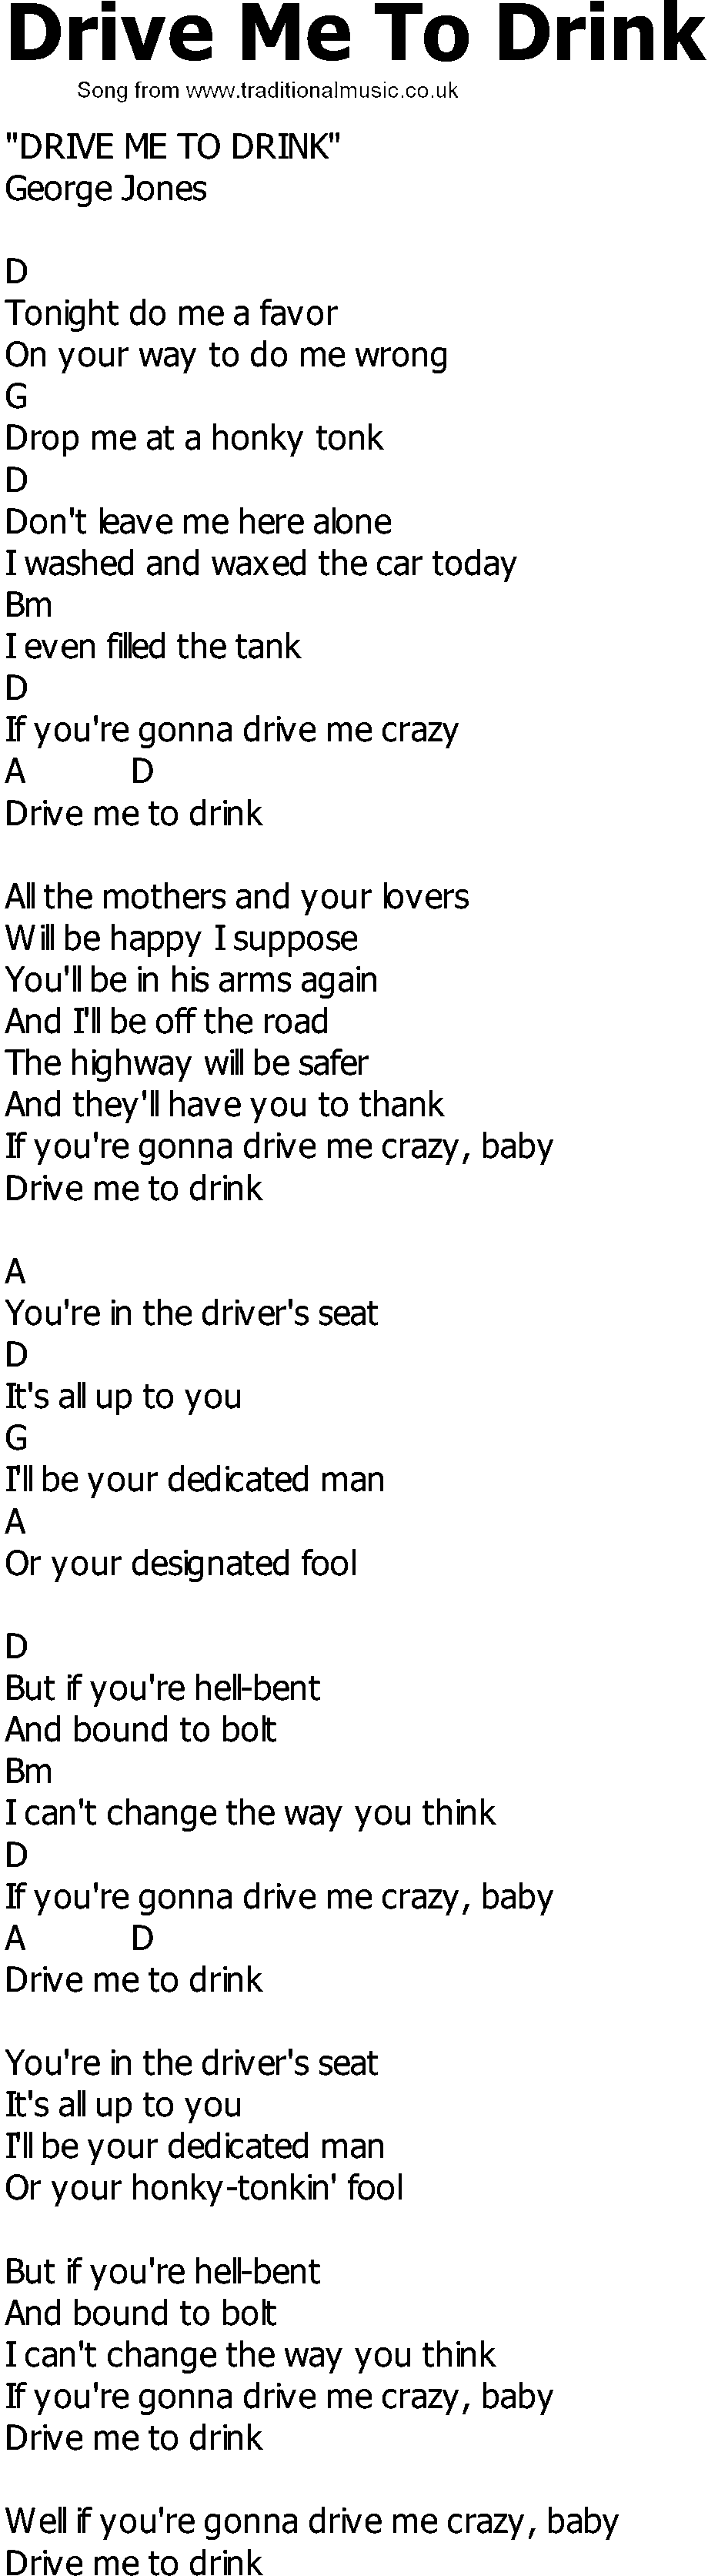 Old Country song lyrics with chords - Drive Me To Drink